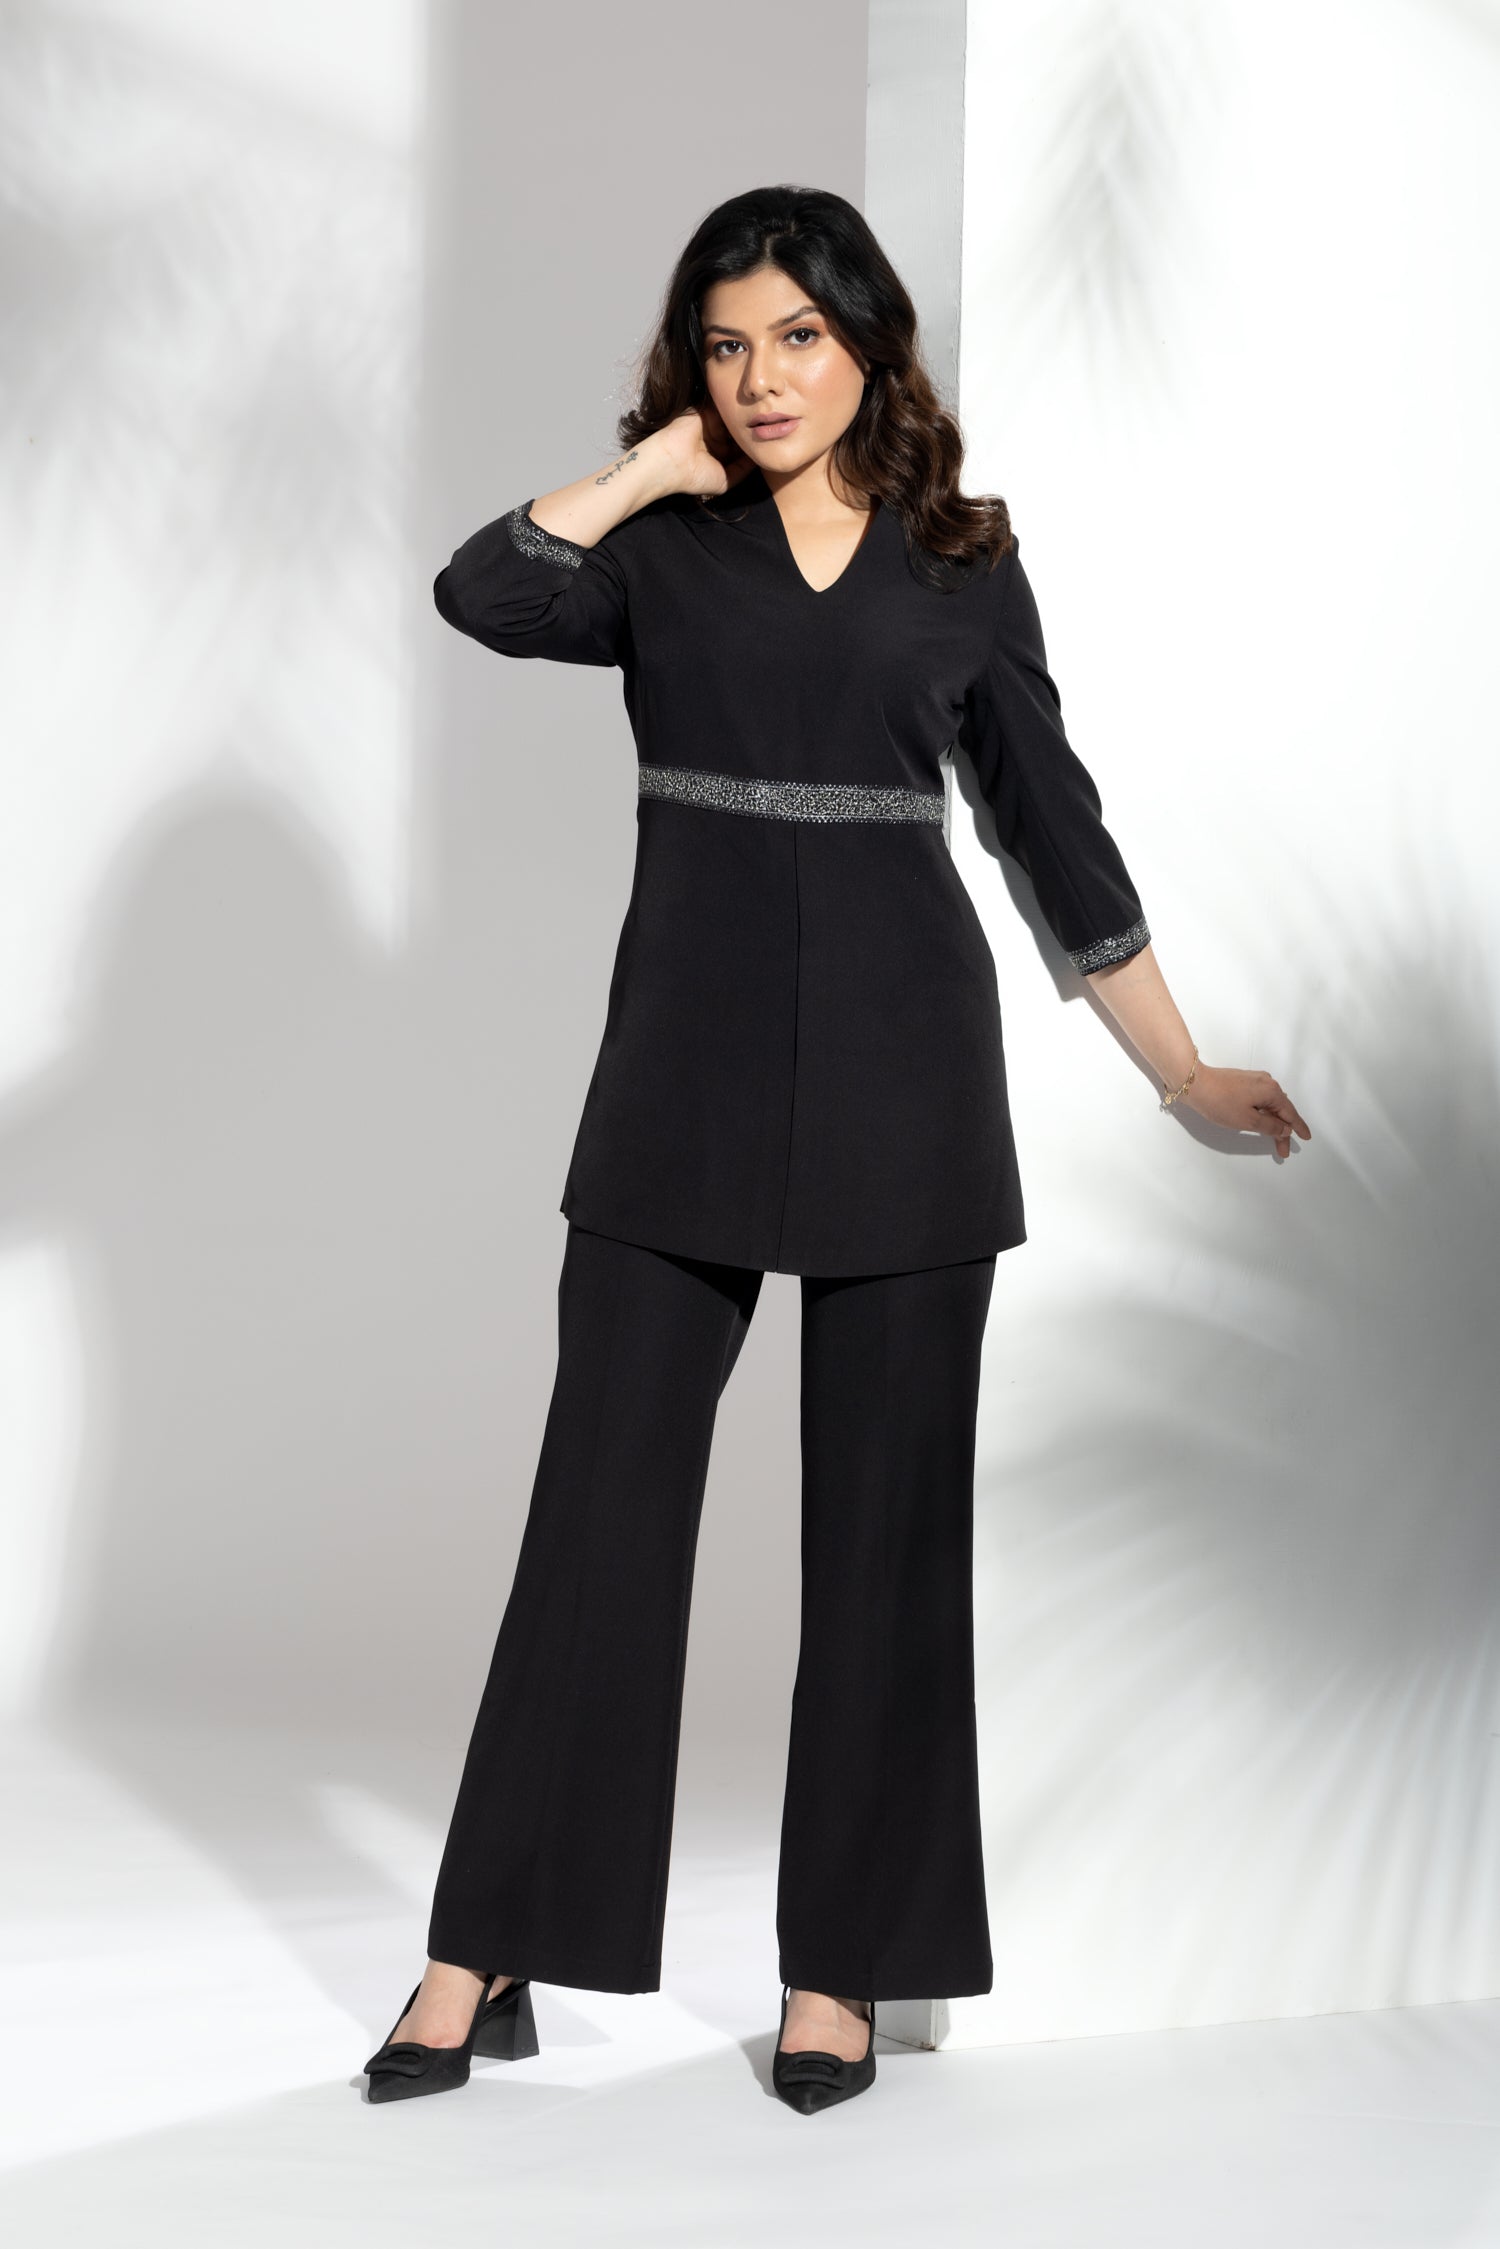 Black V-Neck Embroidered Top And Pants